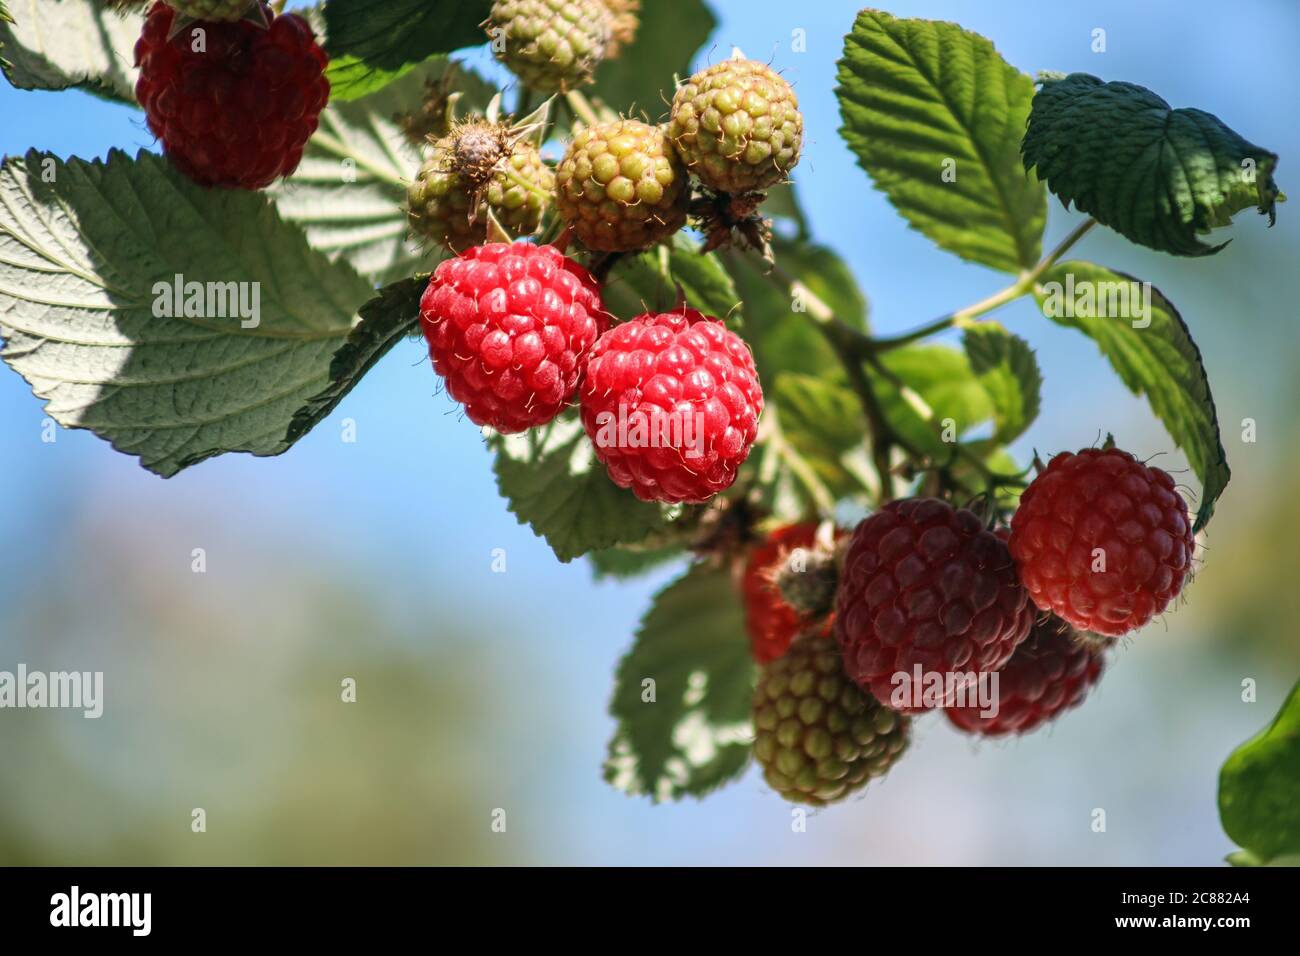 Raspberries coming into season, some ripe others still green Stock Photo